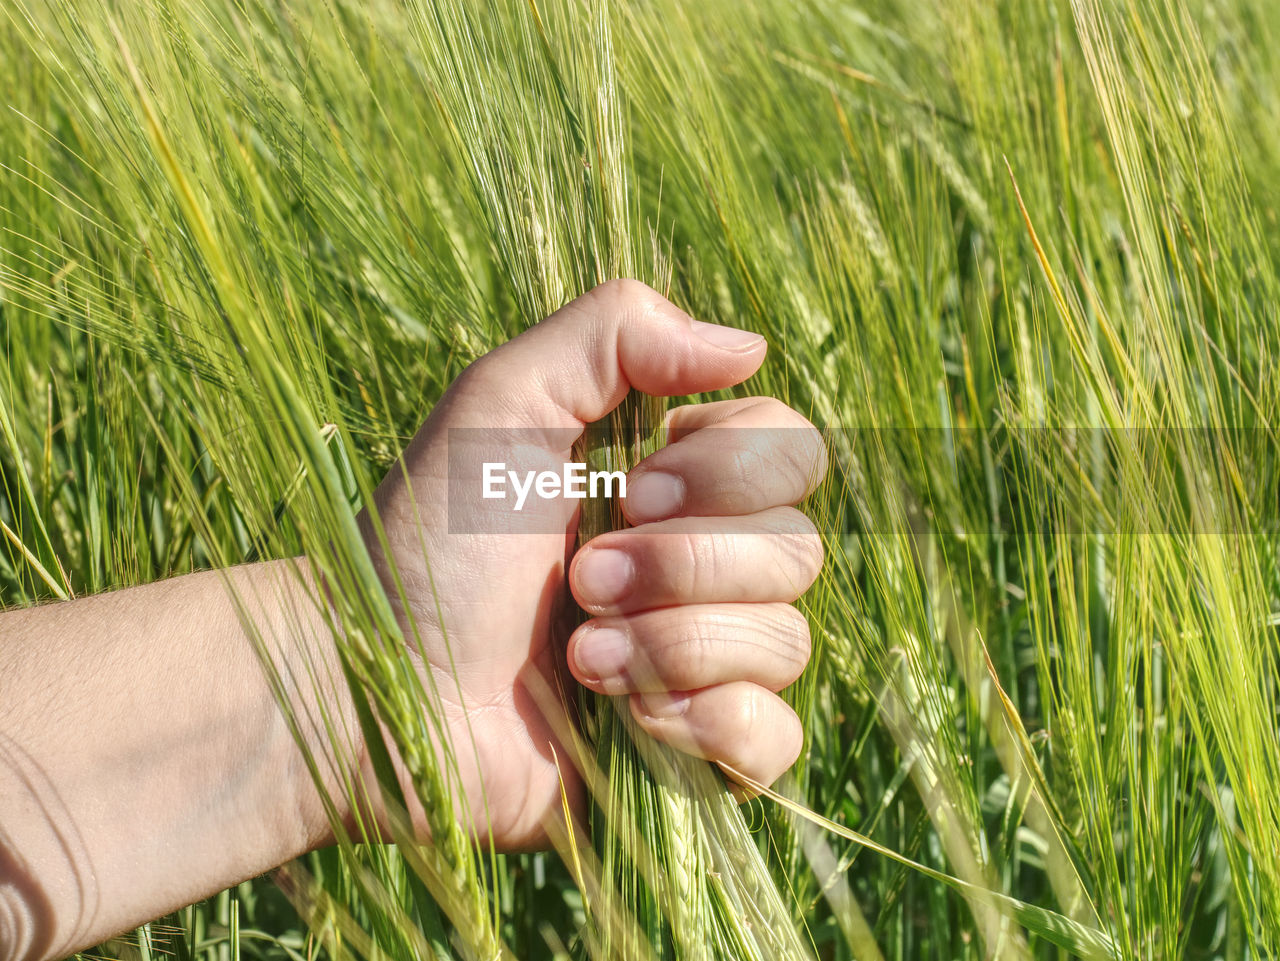 Farmer hand hold spikelets unripe wheat before proces of herbicides and fertilizers for big harvest